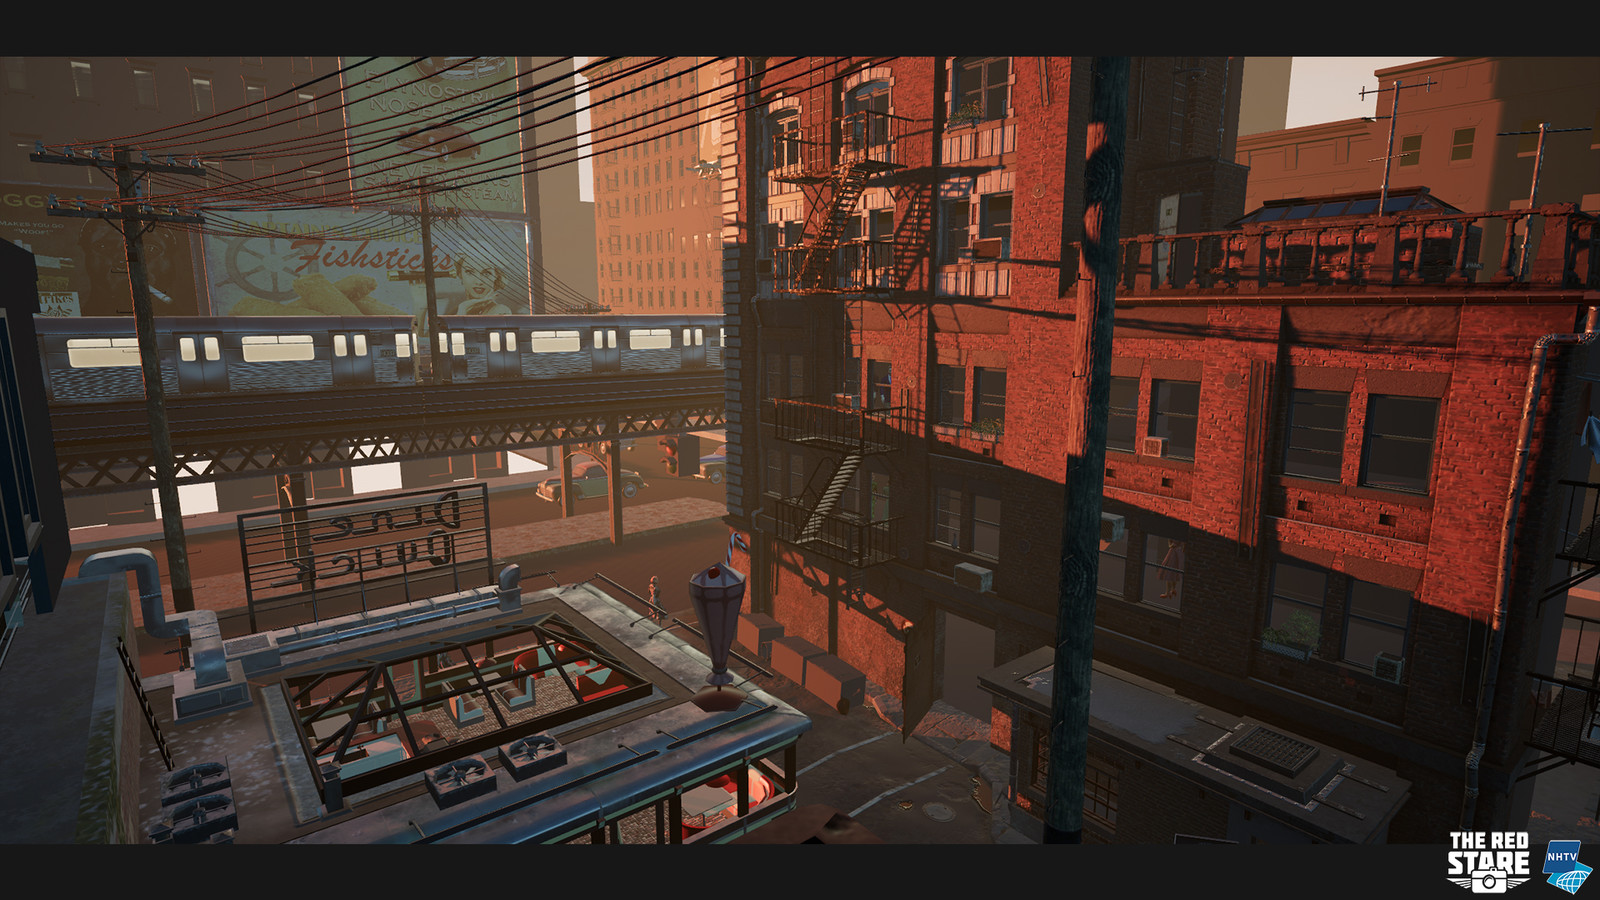 Newest ingame render. We are using a dynamic day and night cycle now. It greatly improved the lighting of the scene.